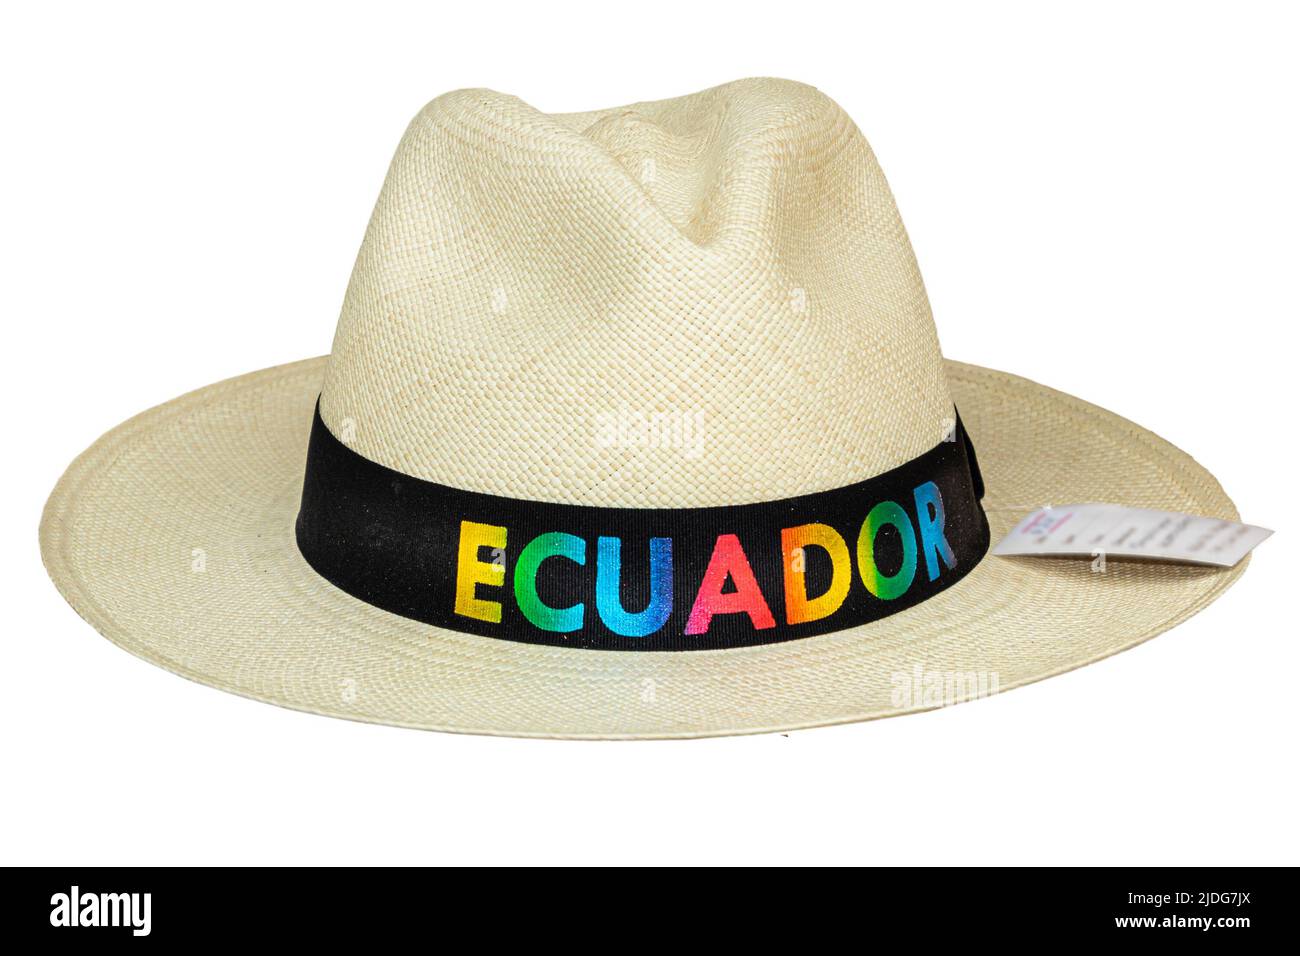 Handmade classic style Panama Hat or sombrero  with country name 'Ecuador' on the band at the traditional outdoor market in Cuenca, Ecuador. Popular s Stock Photo